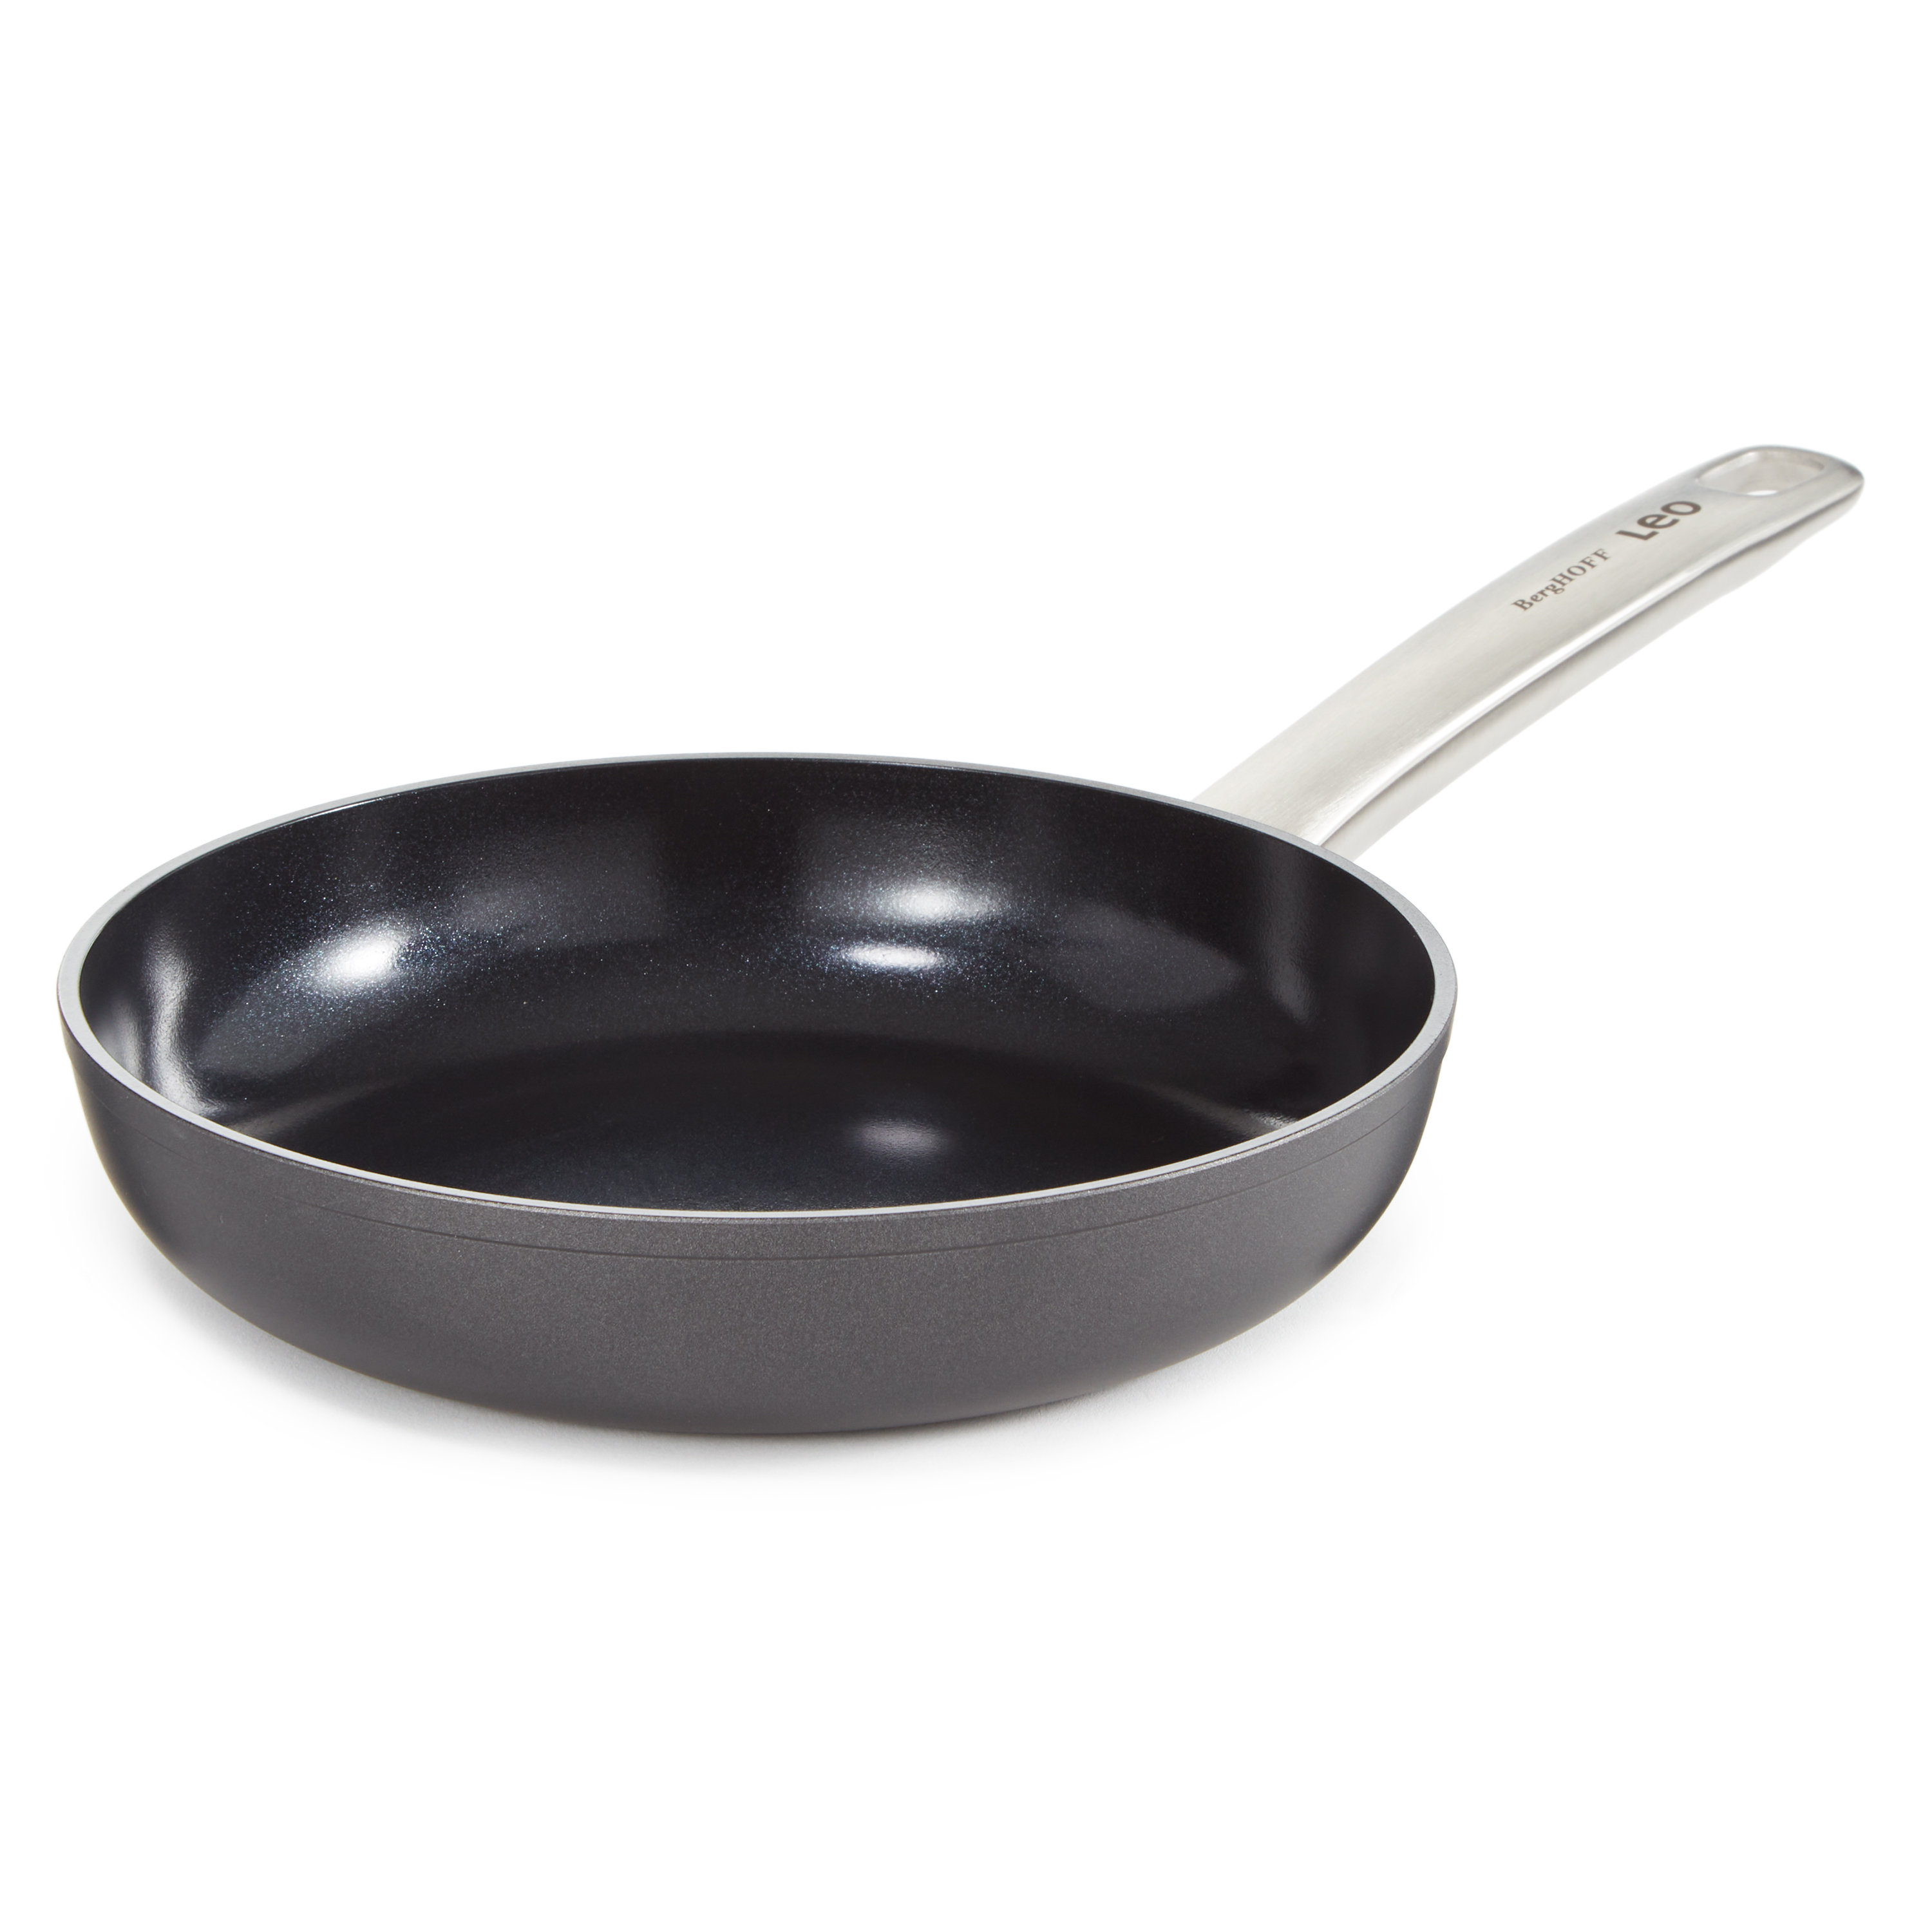 BergHOFF Graphite Non-Stick Ceramic Frying Pan 8, Sustainable Recycled Material